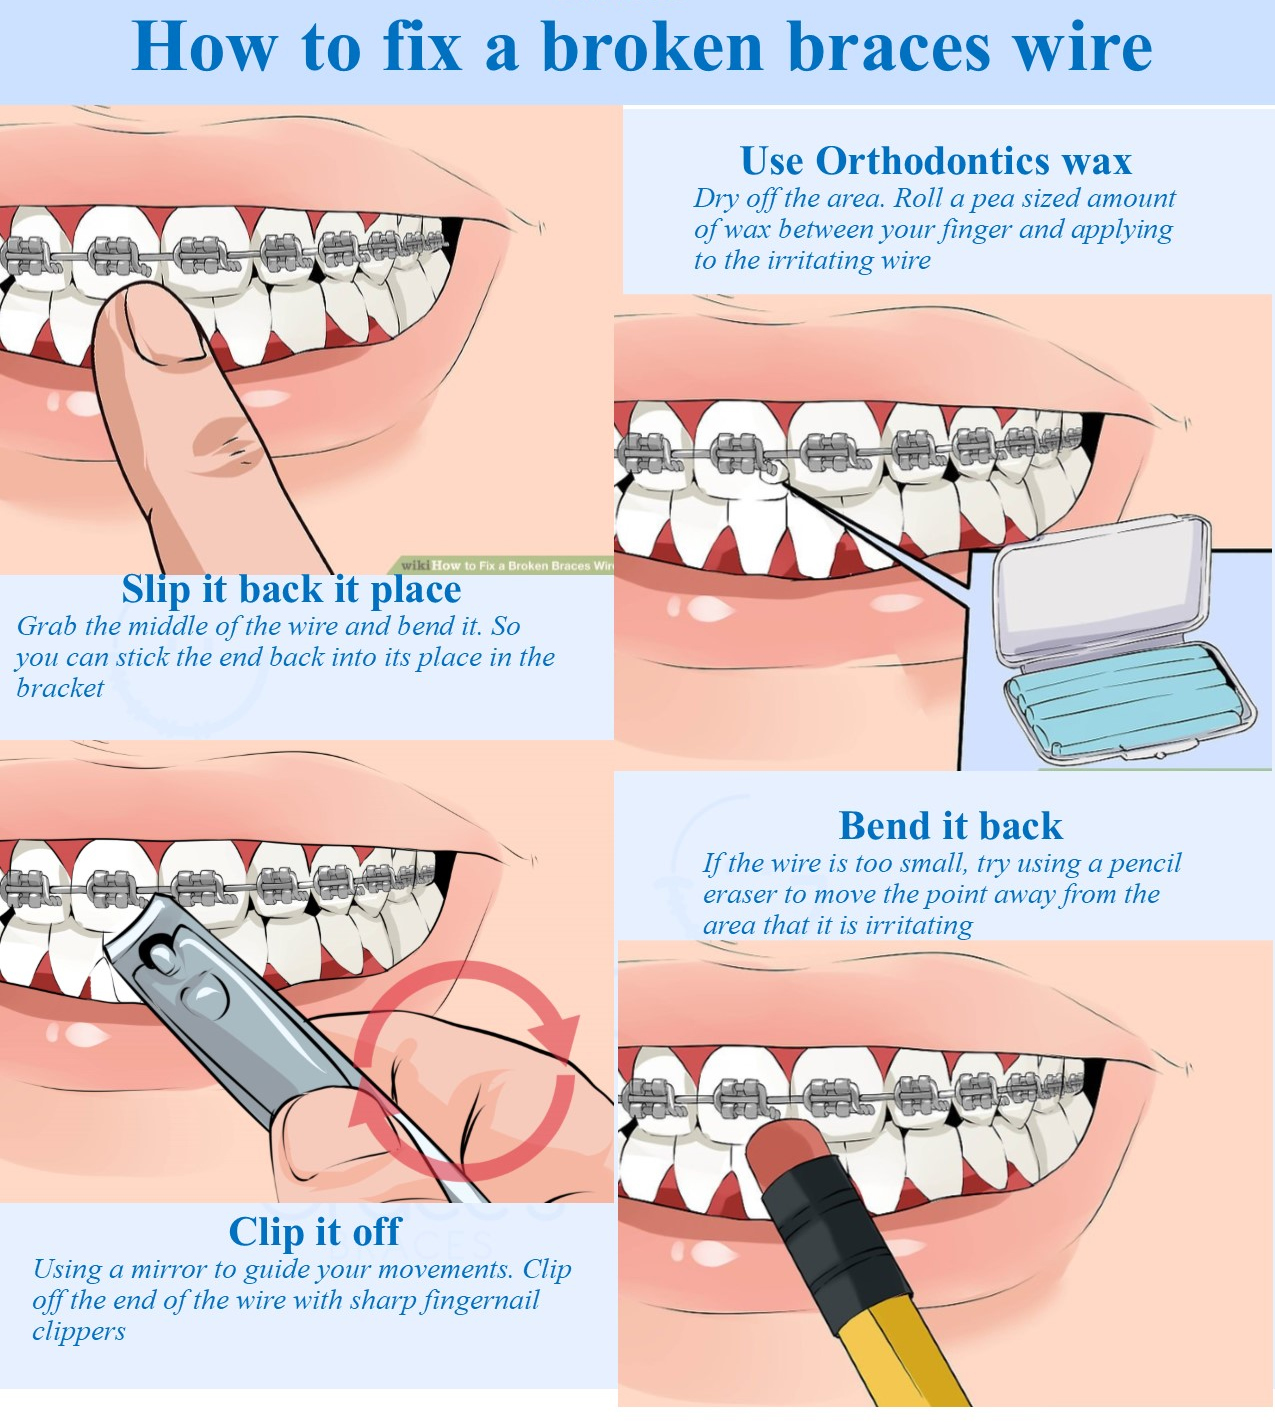 What to do if My Braces Wire Pokes Me?